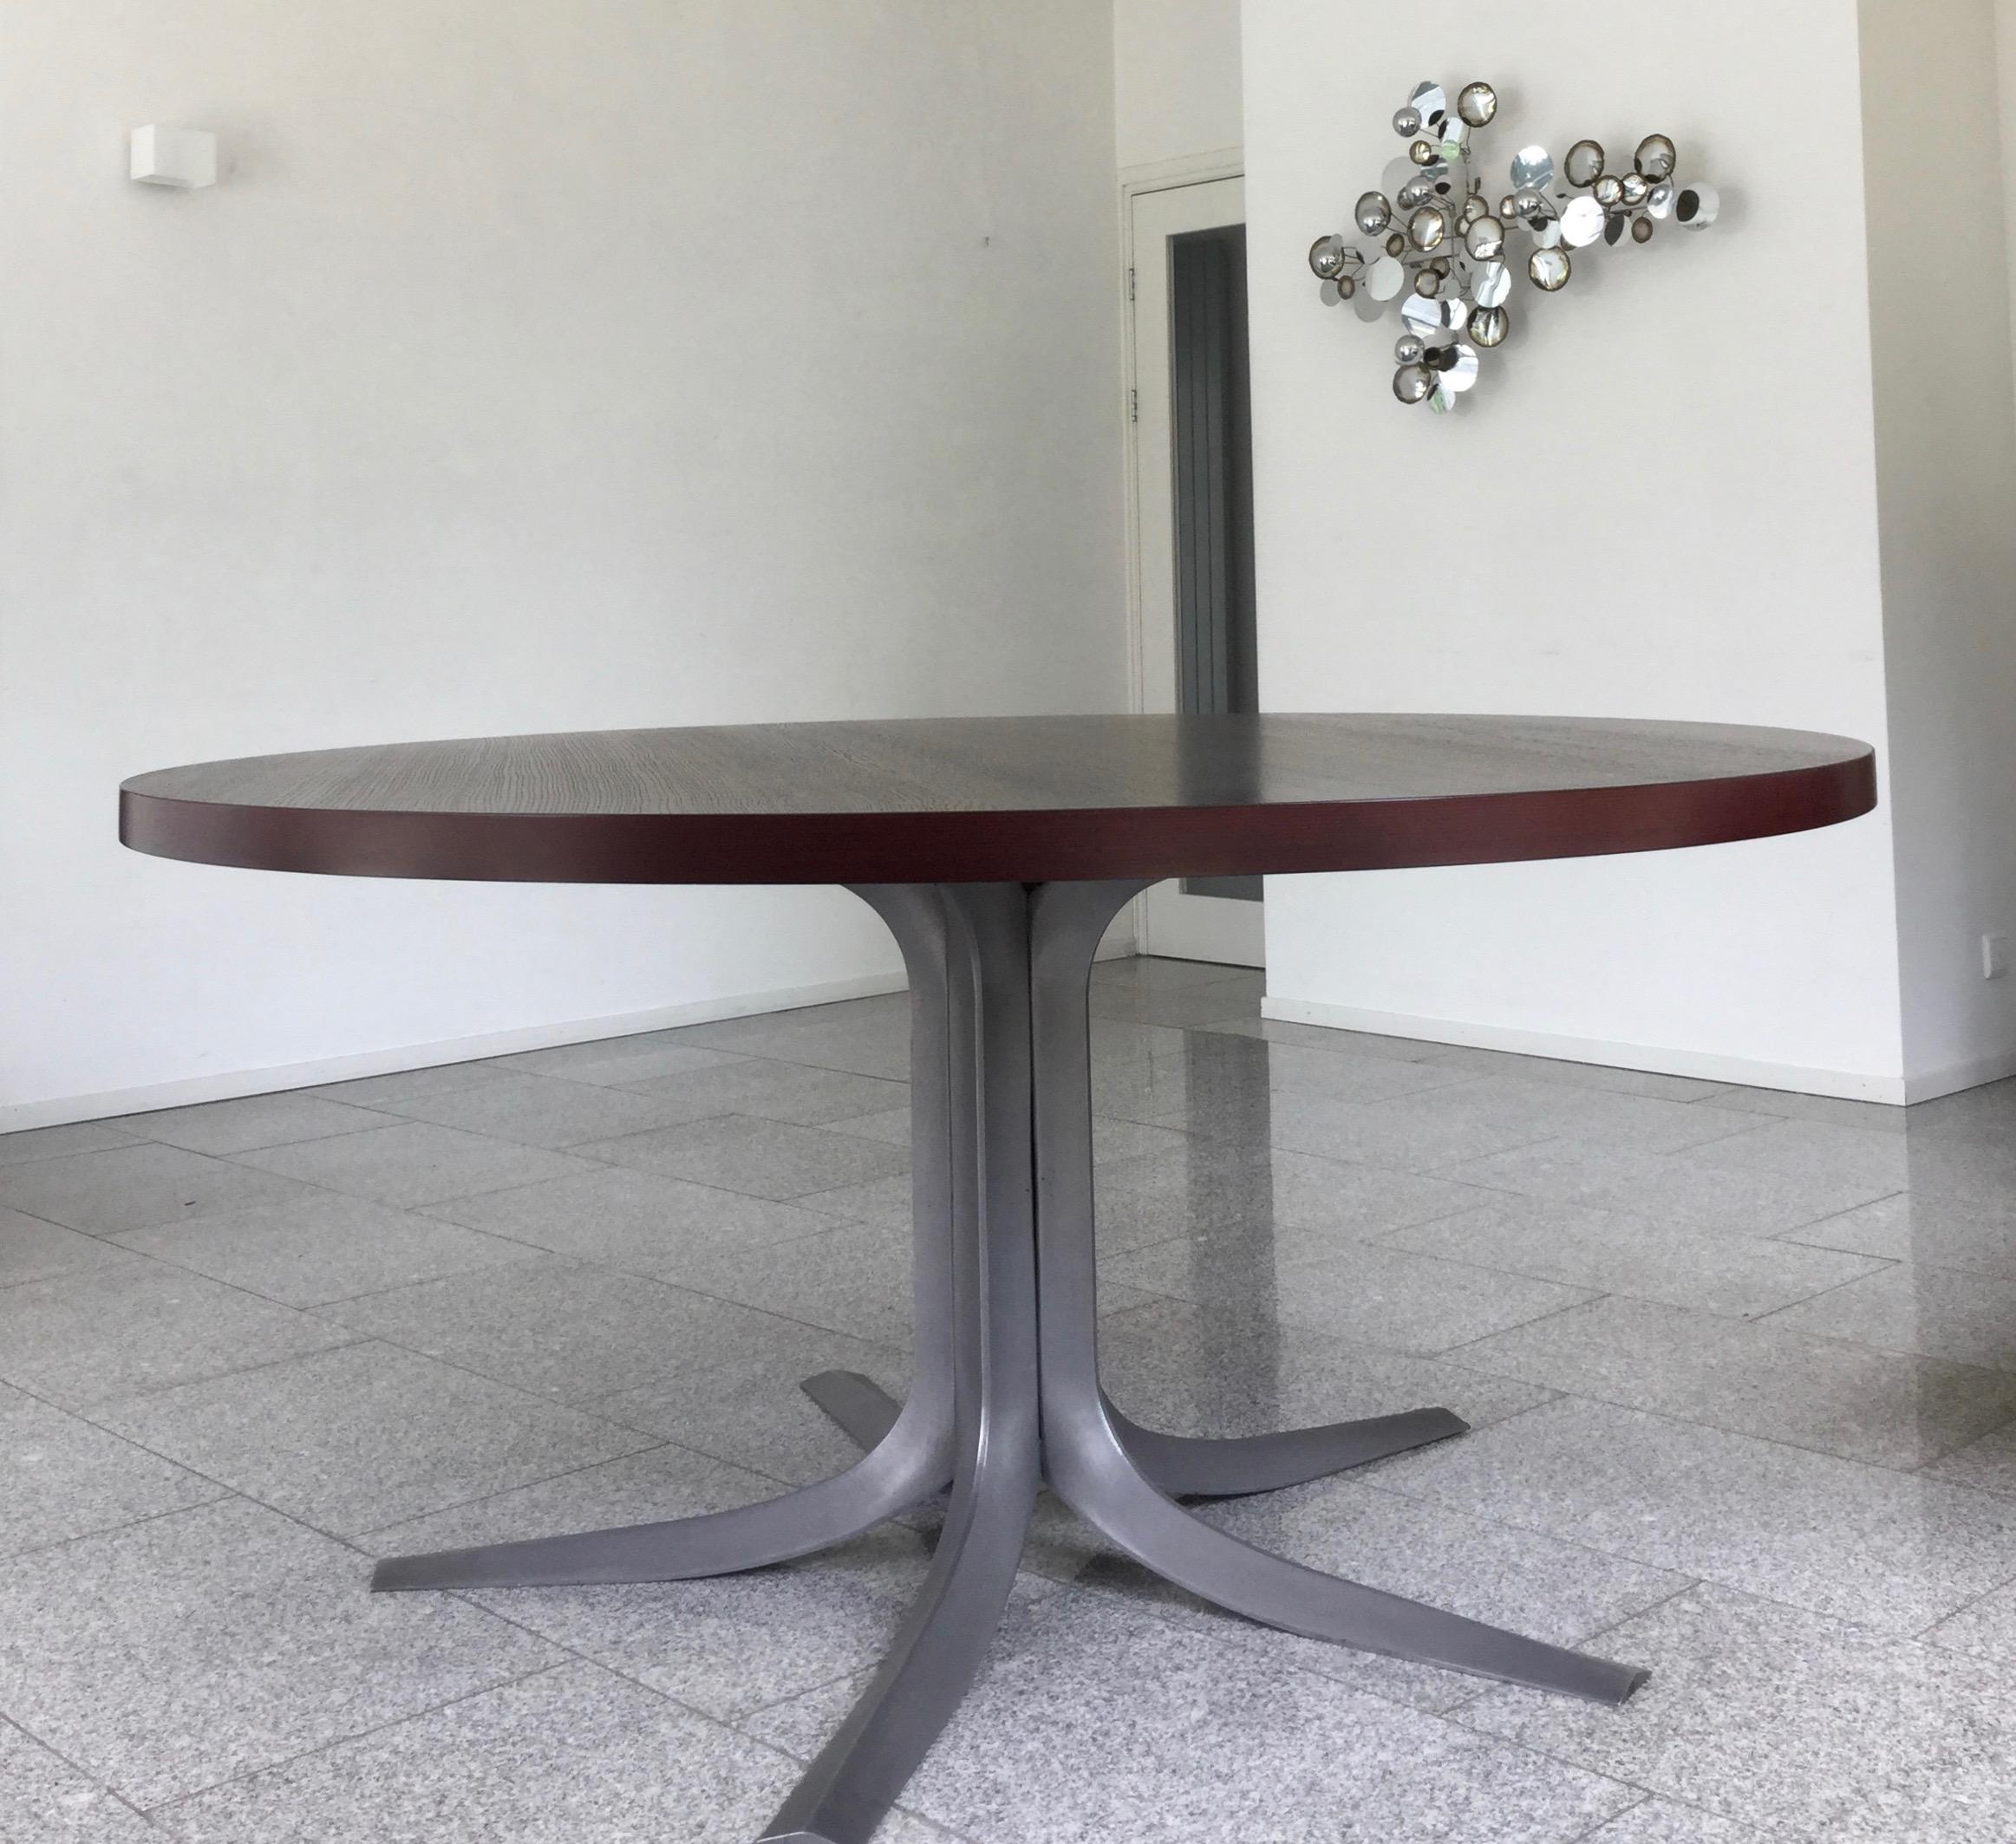 Cast Jules Wabbes 'Pan Coupe' Table